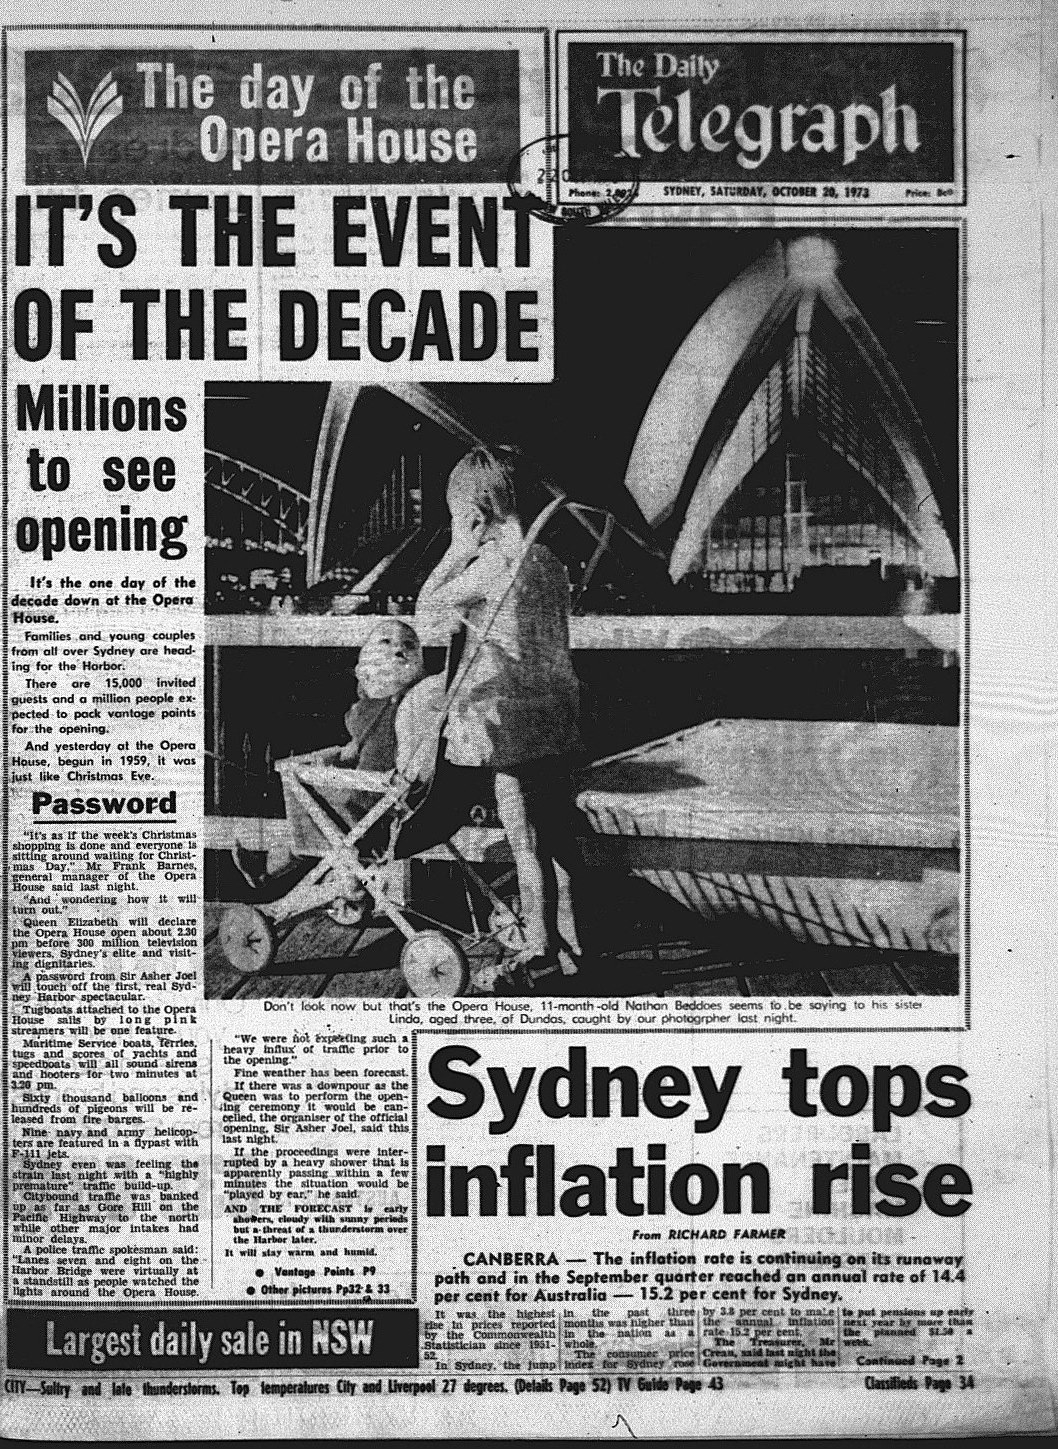 Sydney Opera House Opening Supplement October 19 1973 daily telegraph (1)A